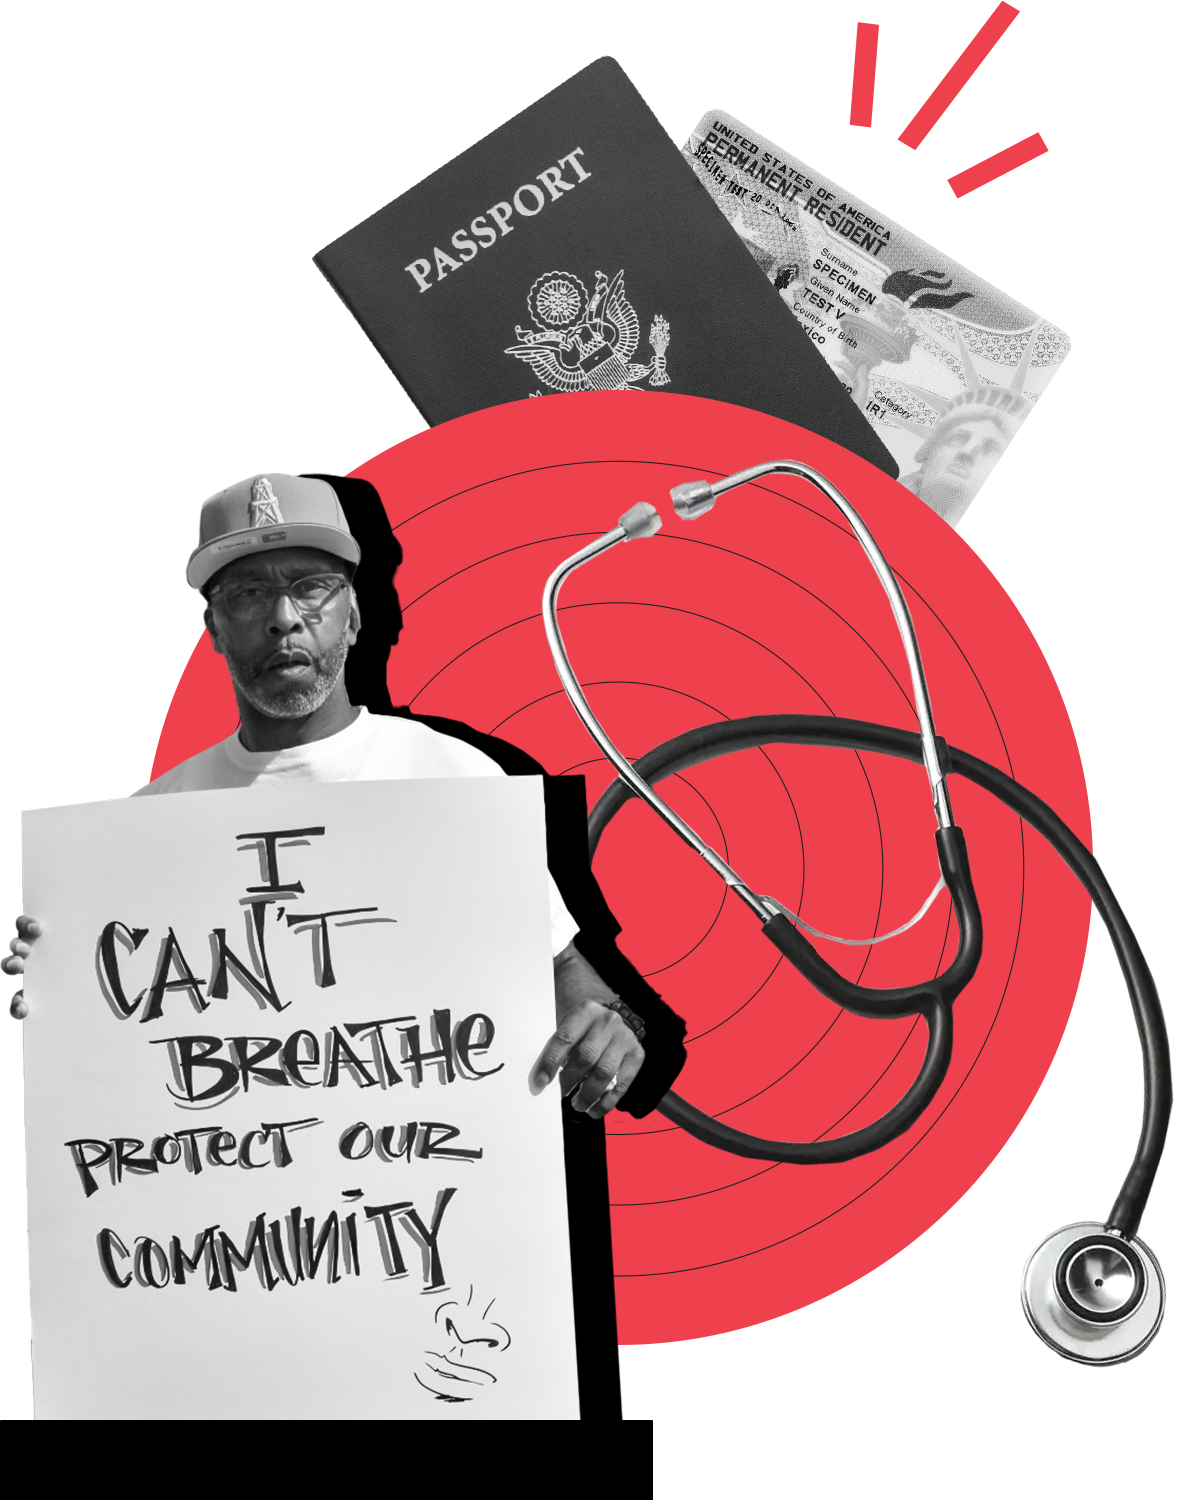 Promoting Equity Collage. Elements include: Passport and green card, stethoscope, and protestor holding a sign that reads, 